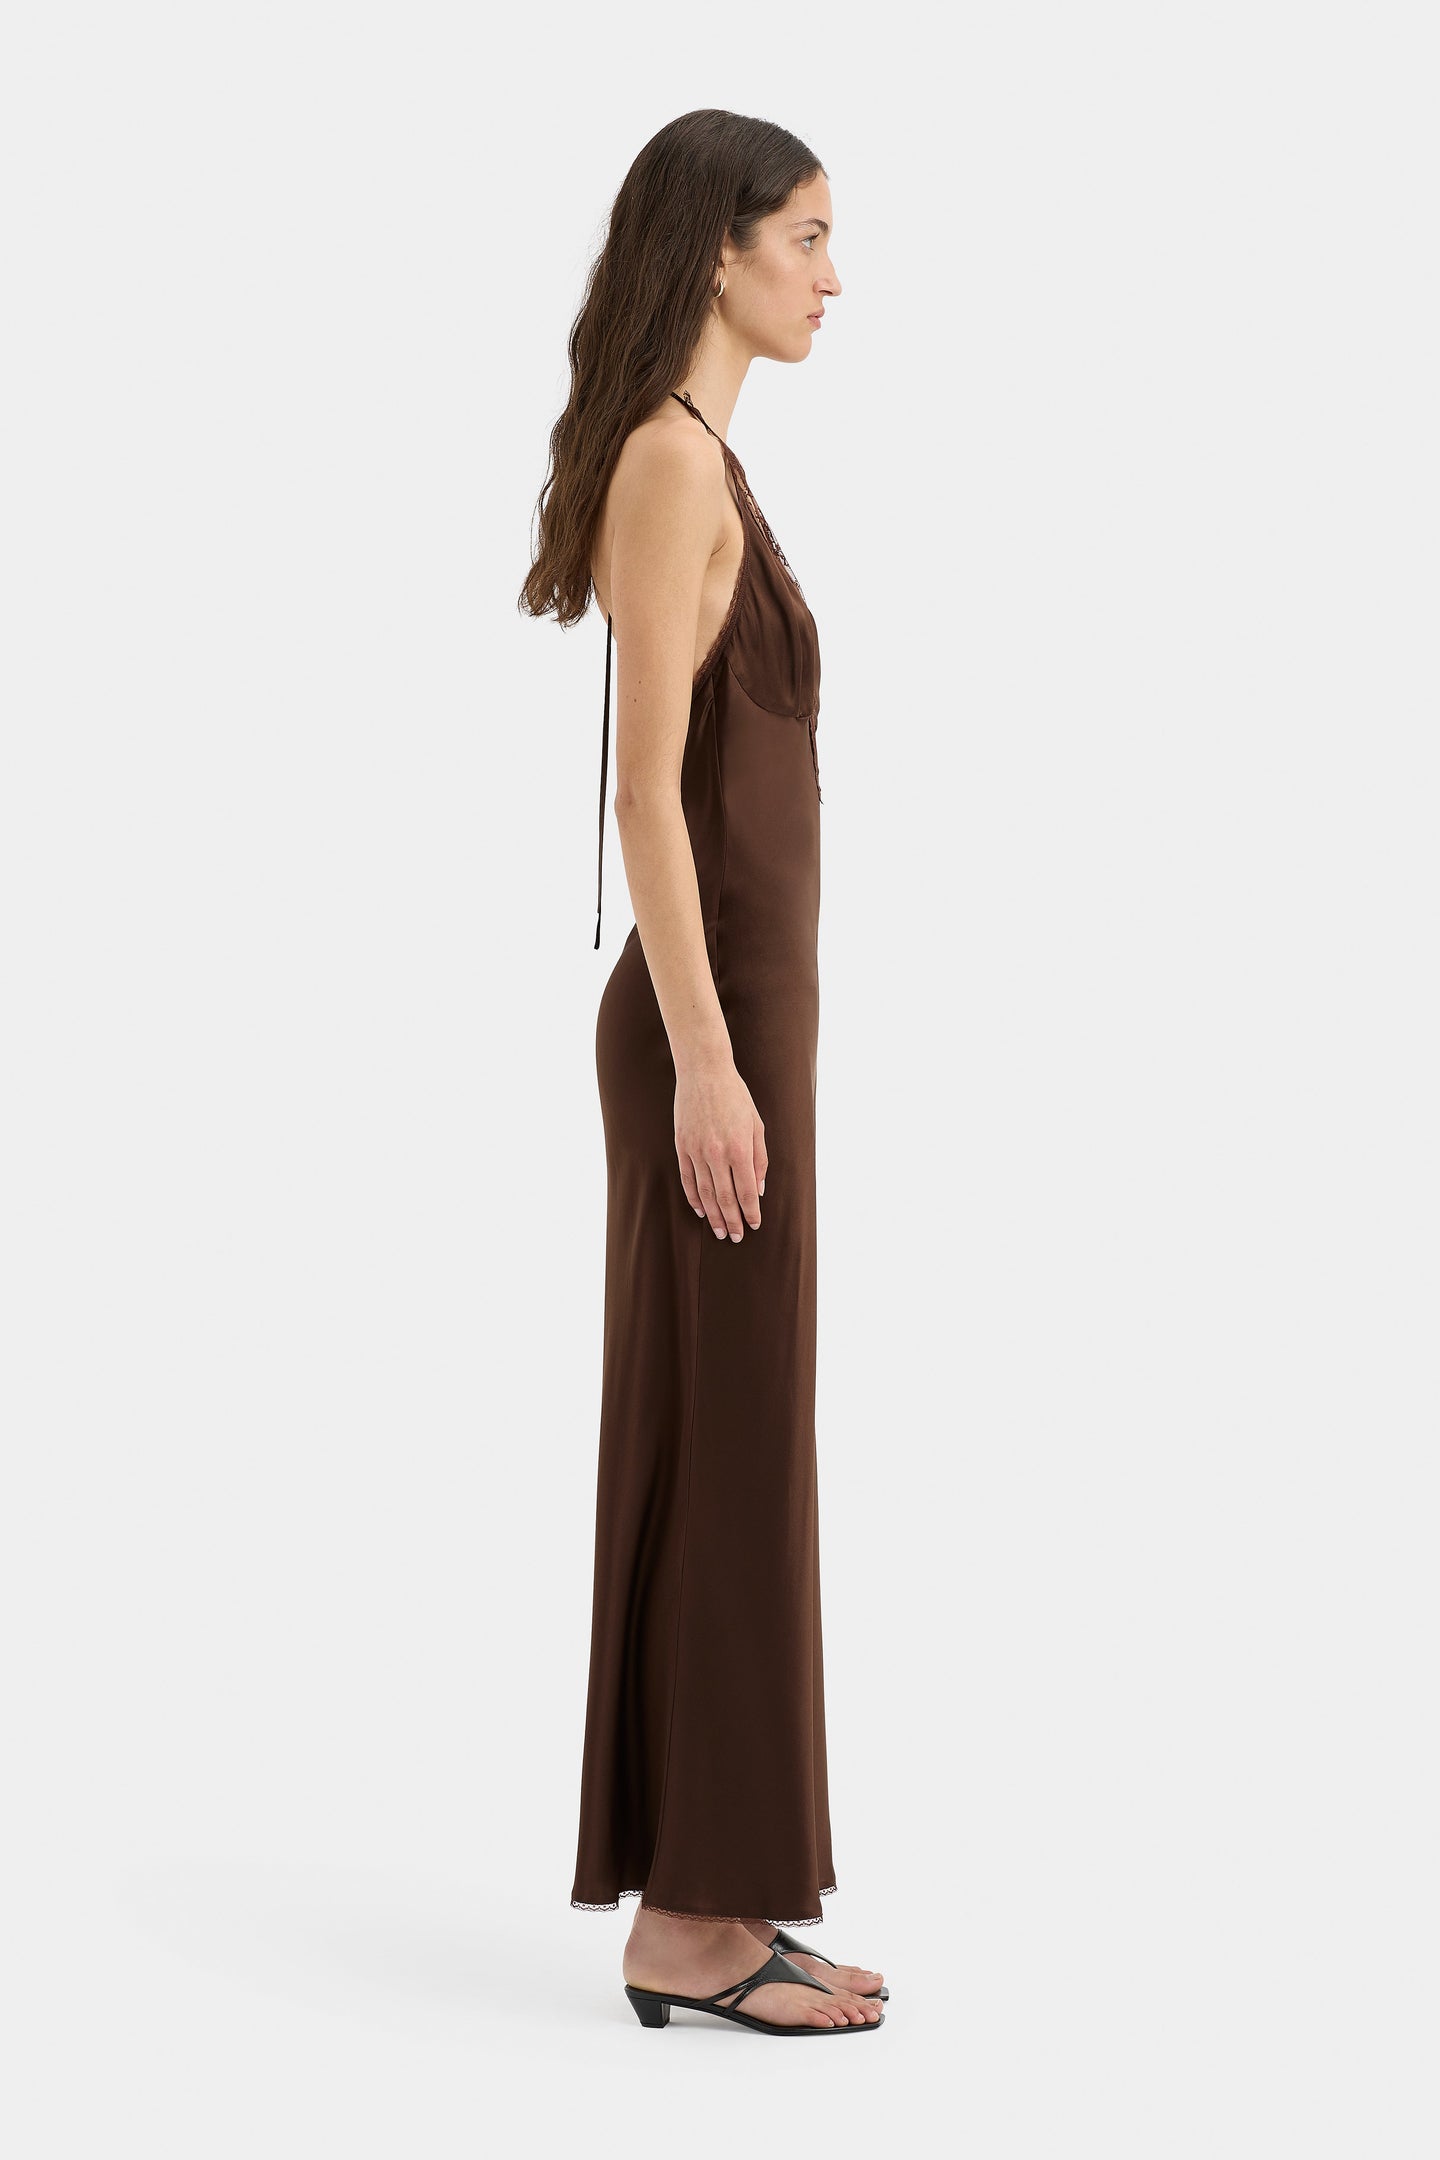 SIR the label Aries Halter Gown CHOCOLATE